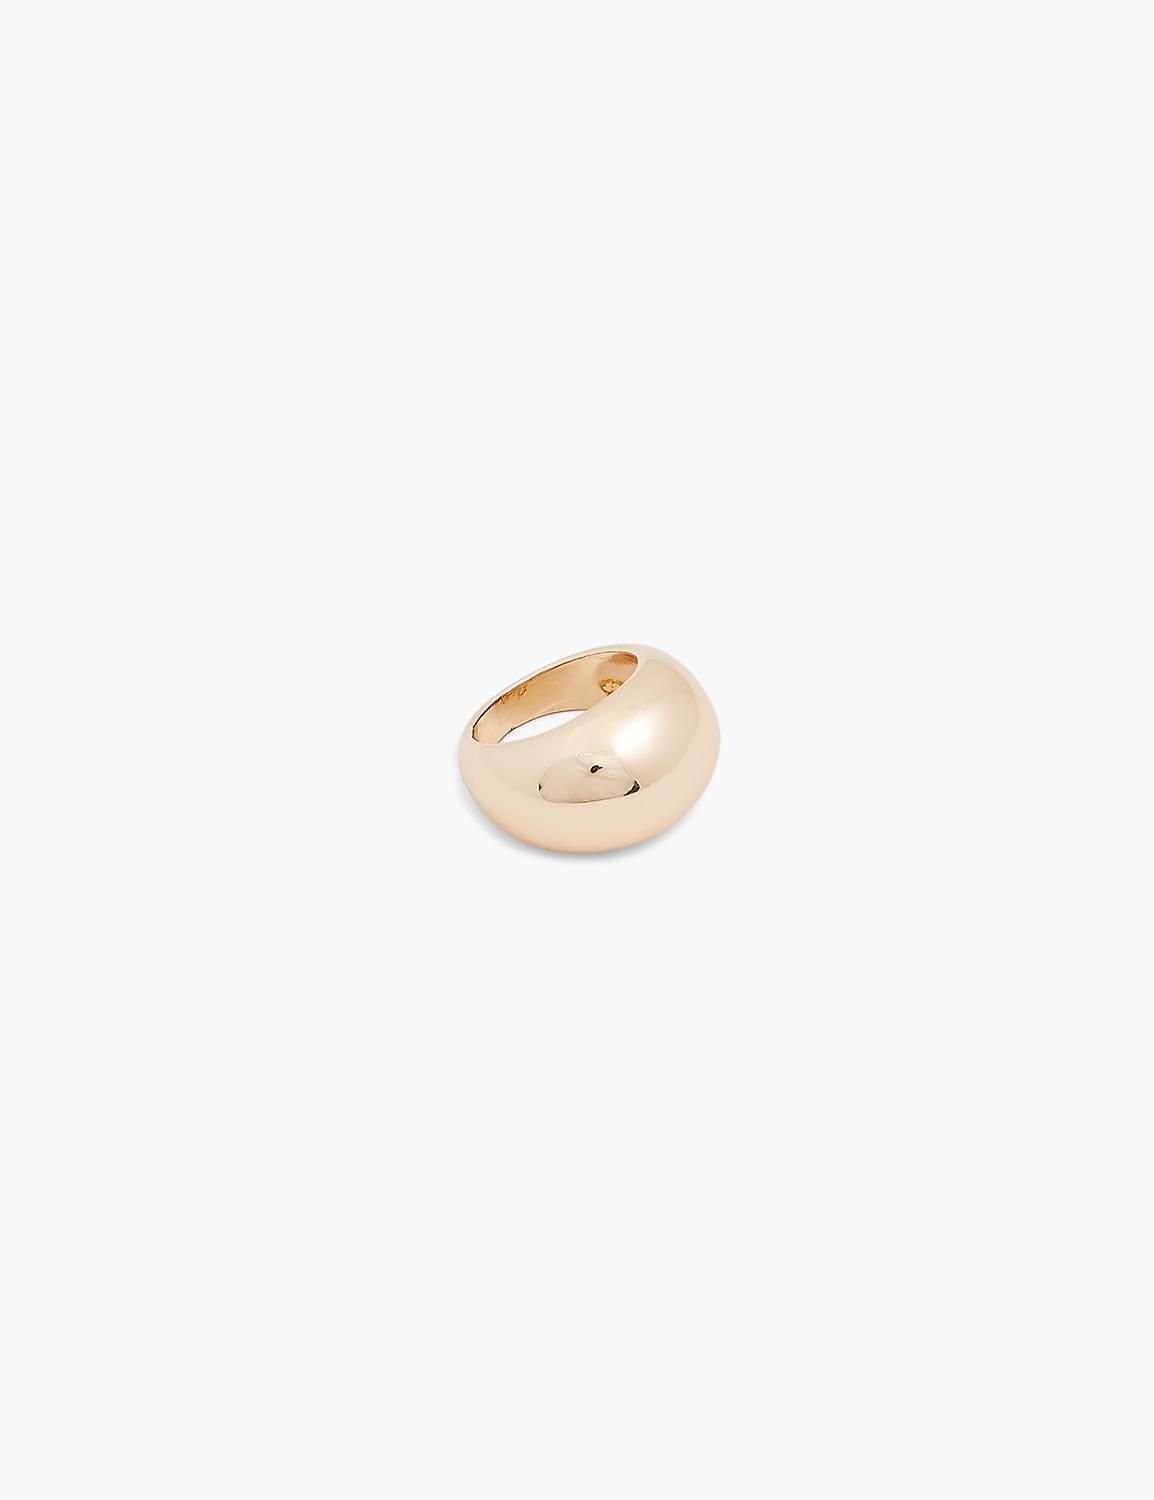 Elevated Dome Ring Product Image 1